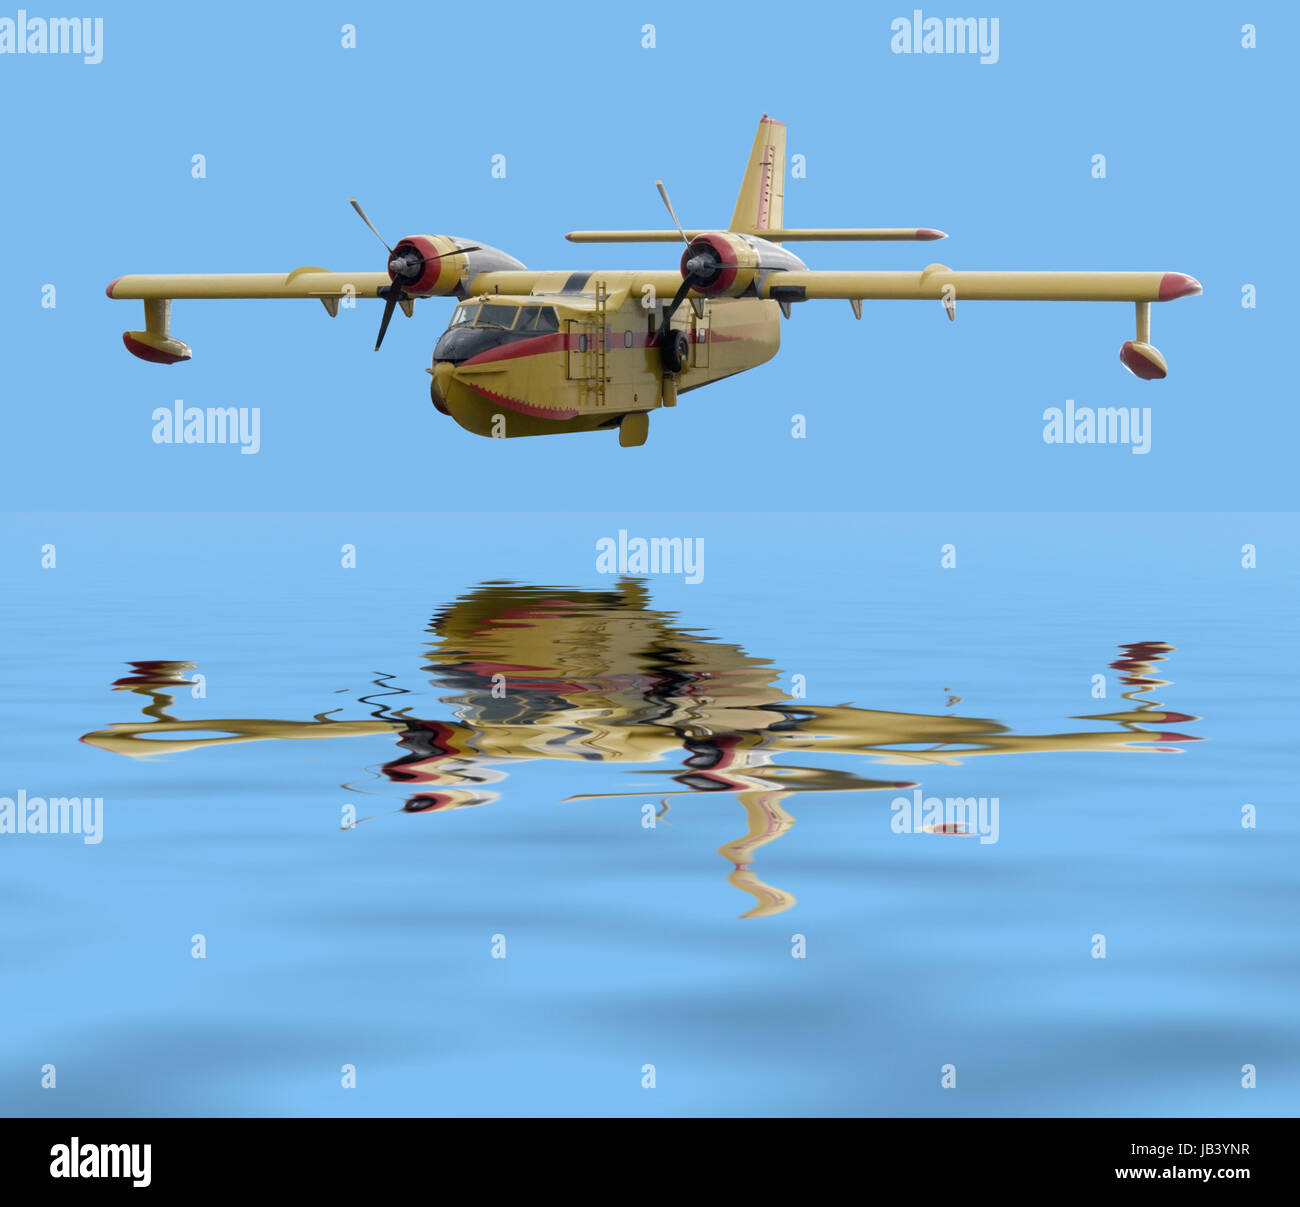 historic flying boat over mirroring water surface in blue ambiance Stock Photo